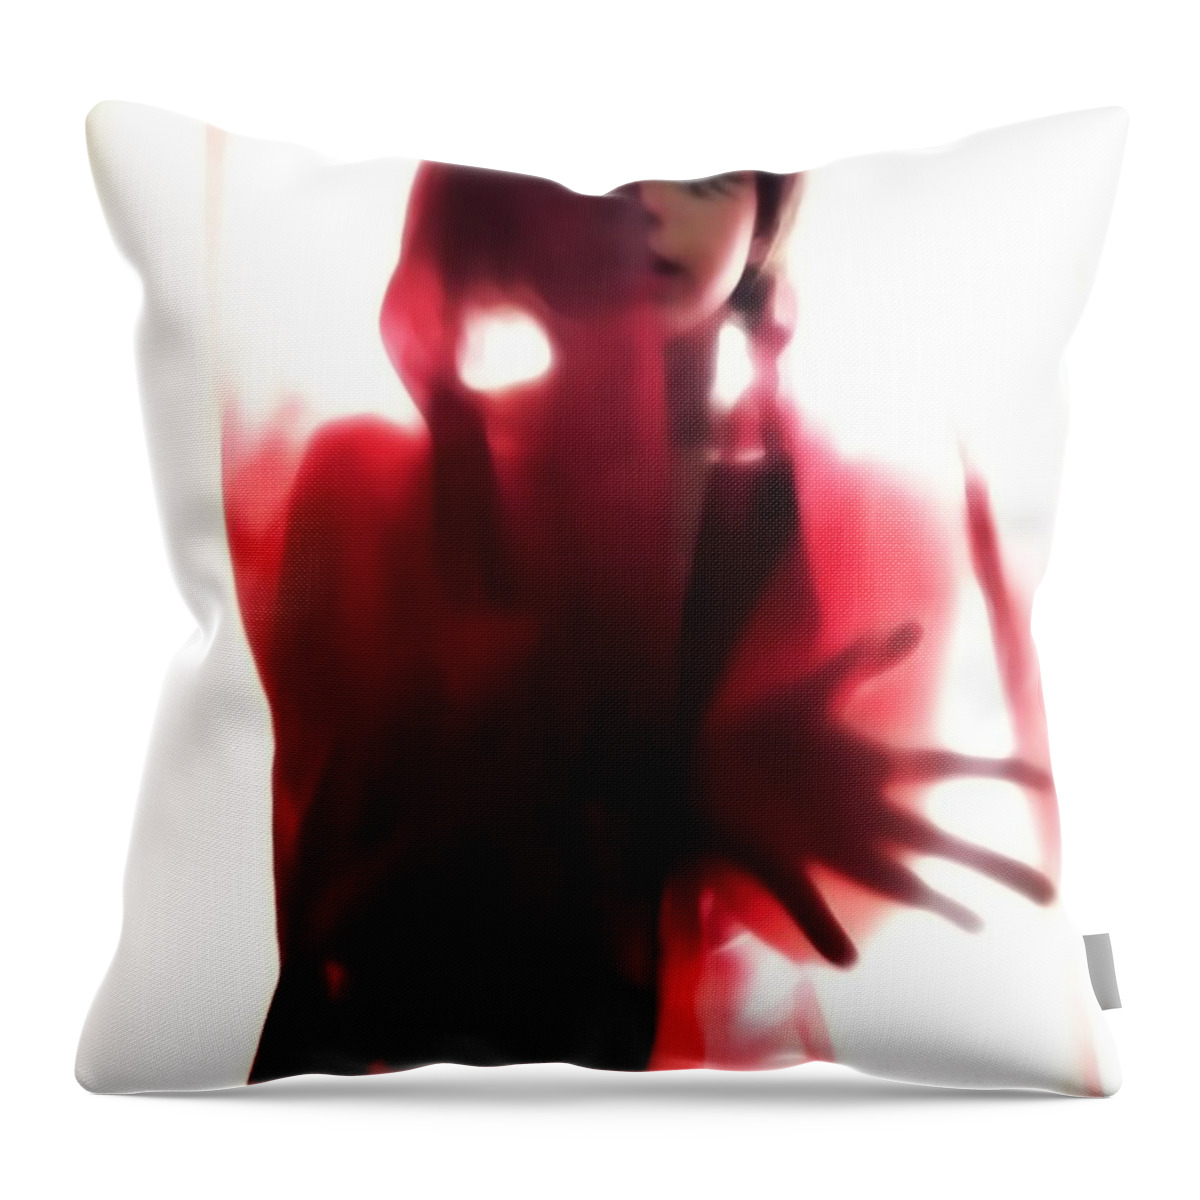 White Throw Pillow featuring the photograph Lone by Jessica S